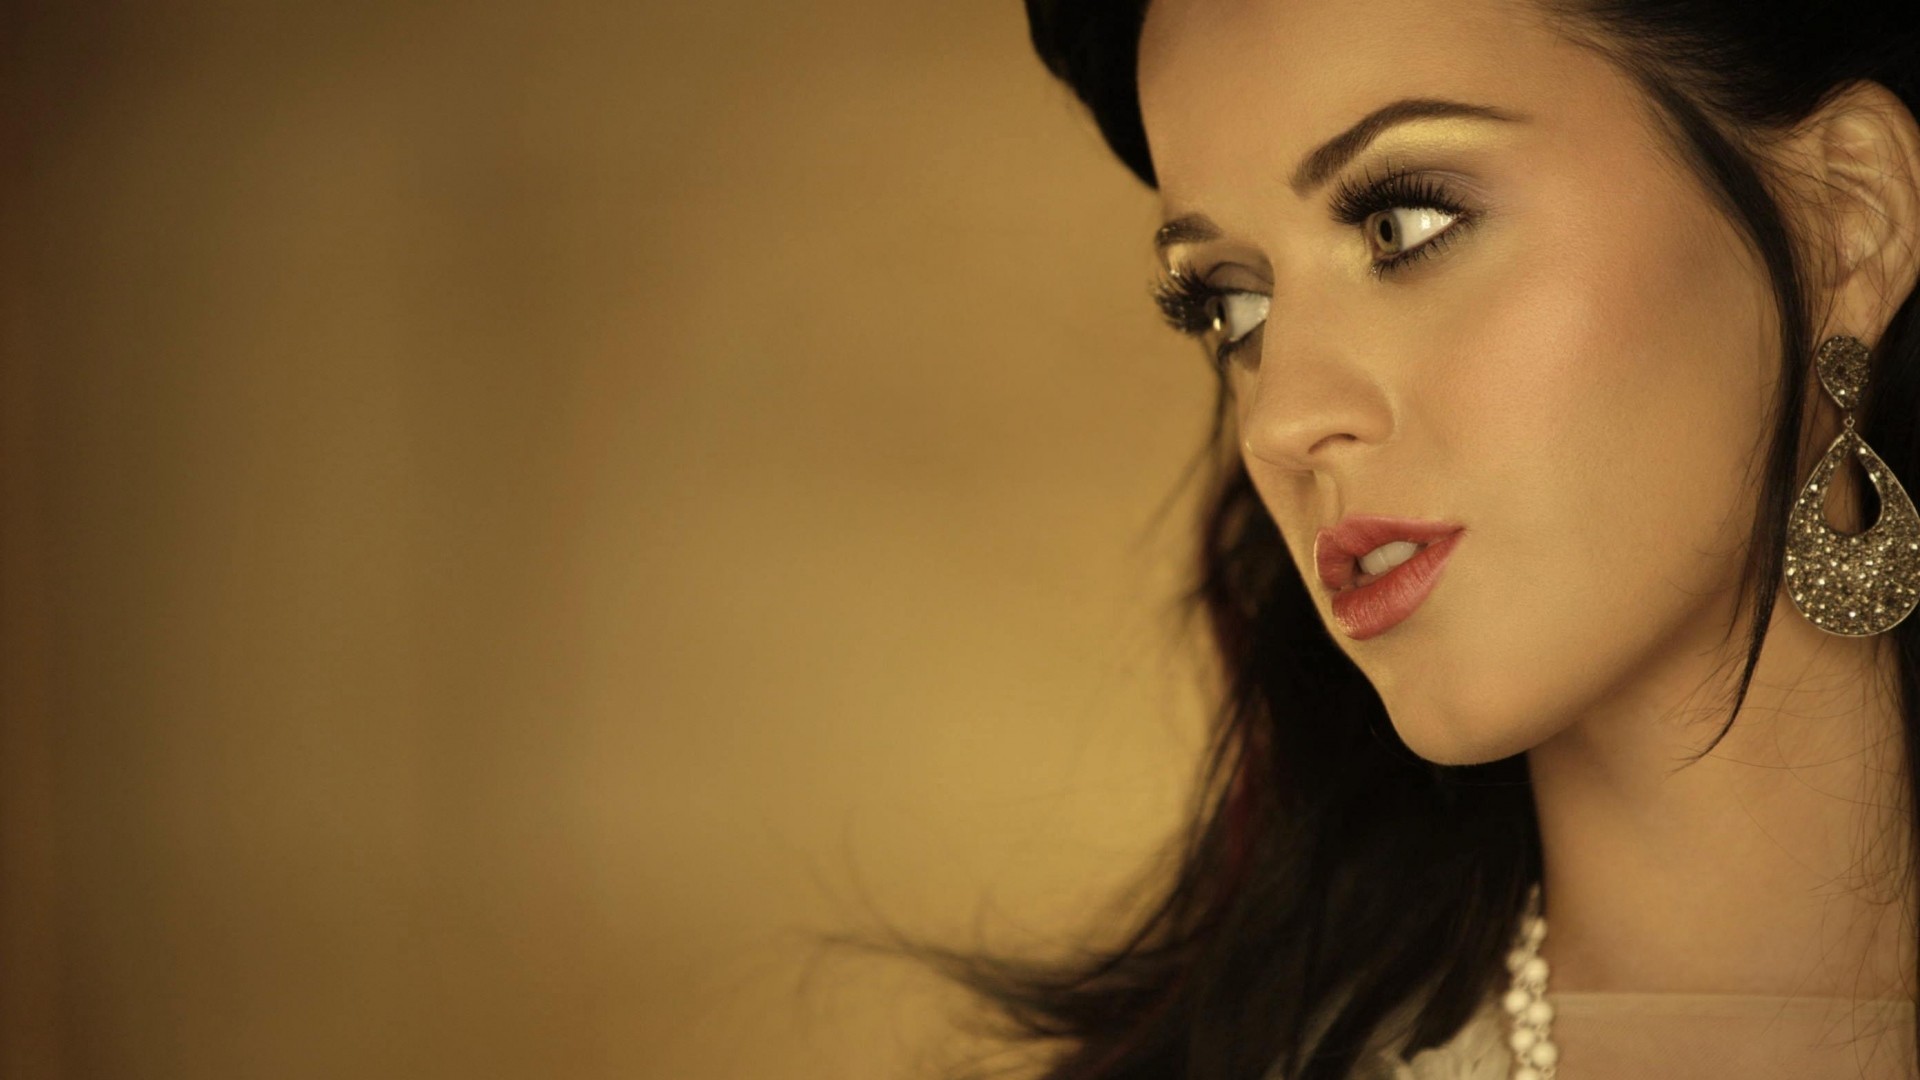 Katy Perry HD Wallpapers | HD Wallpapers